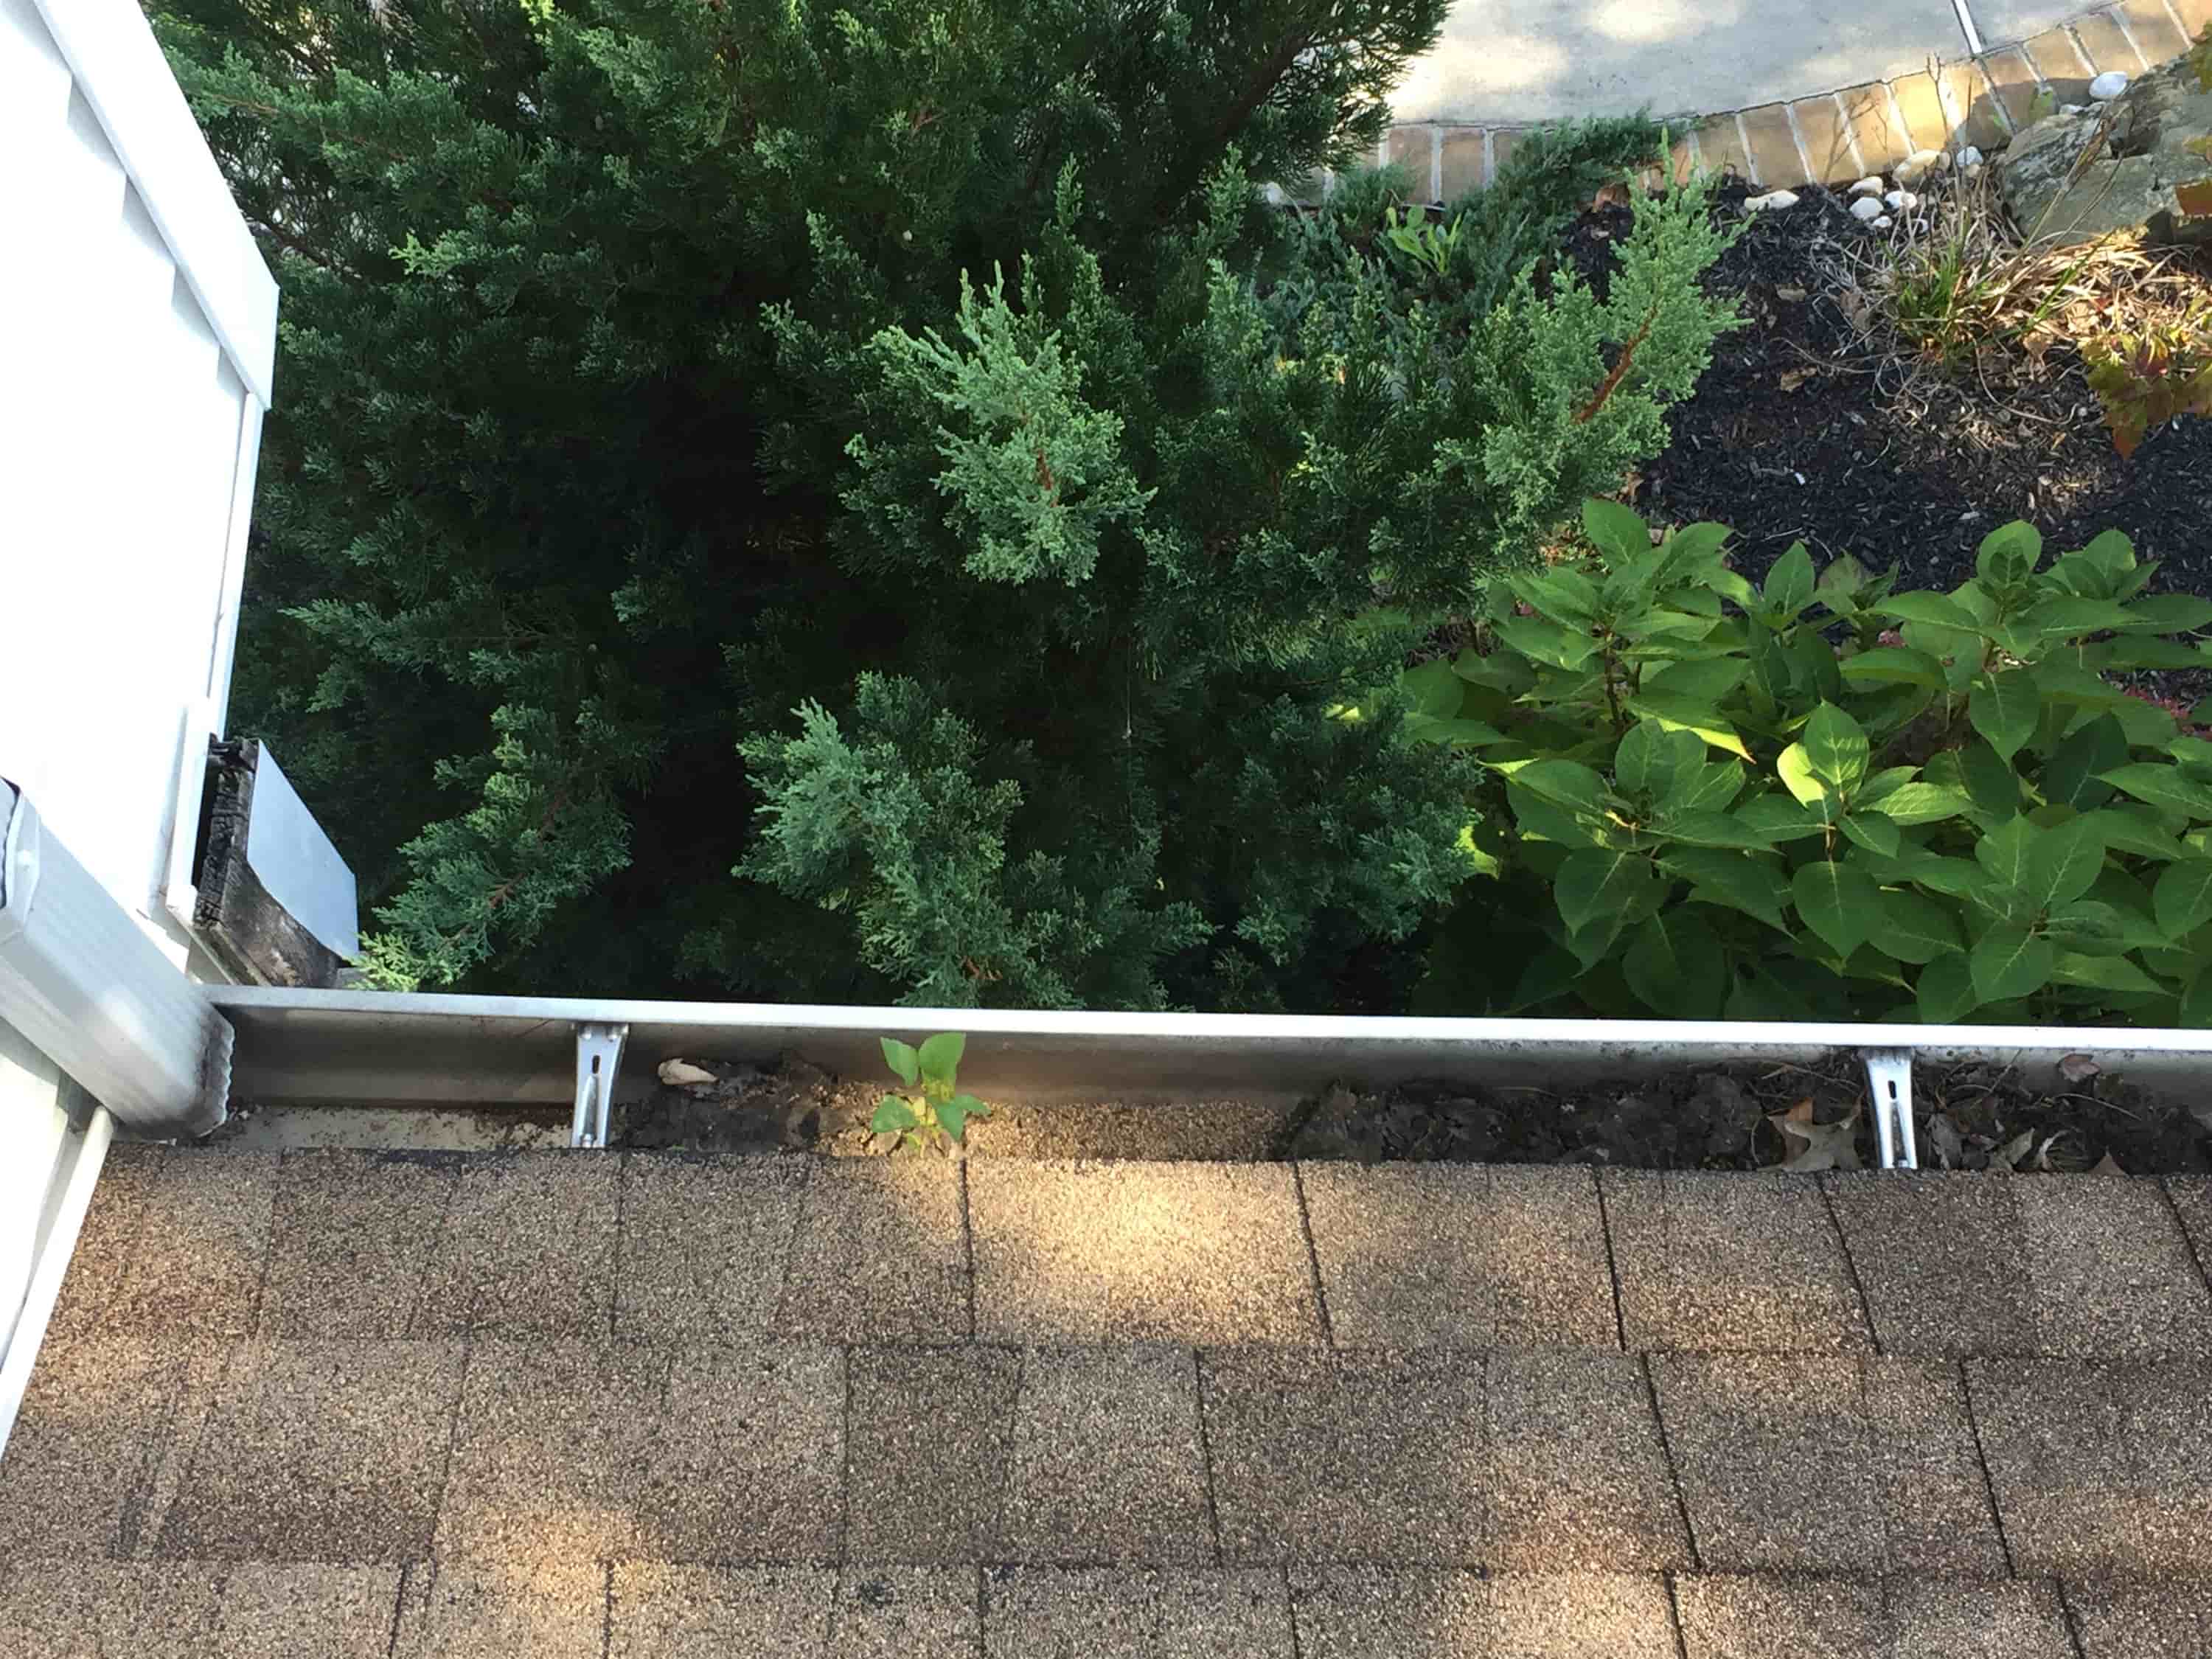 gutter cleaning cost estimate